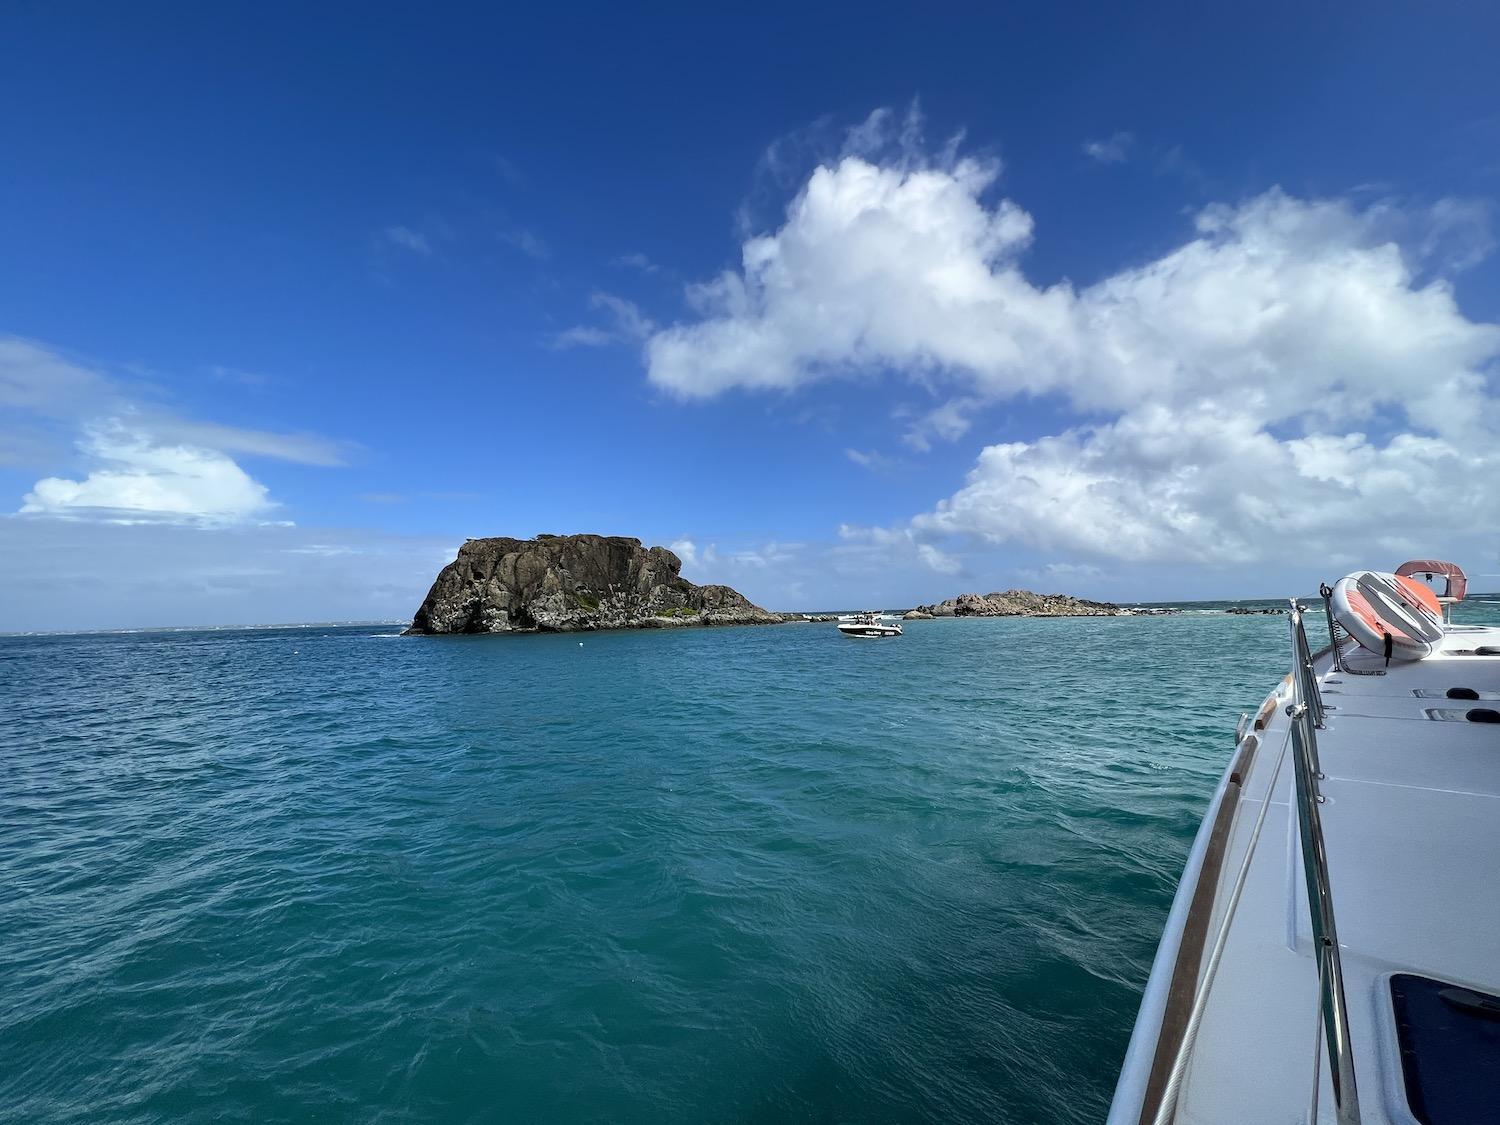 The sea is rough when I sail by Creole Rock with Pyratz Gourmet Sailing. It's popular with divers but protected by the St. Martin Nature Reserve.